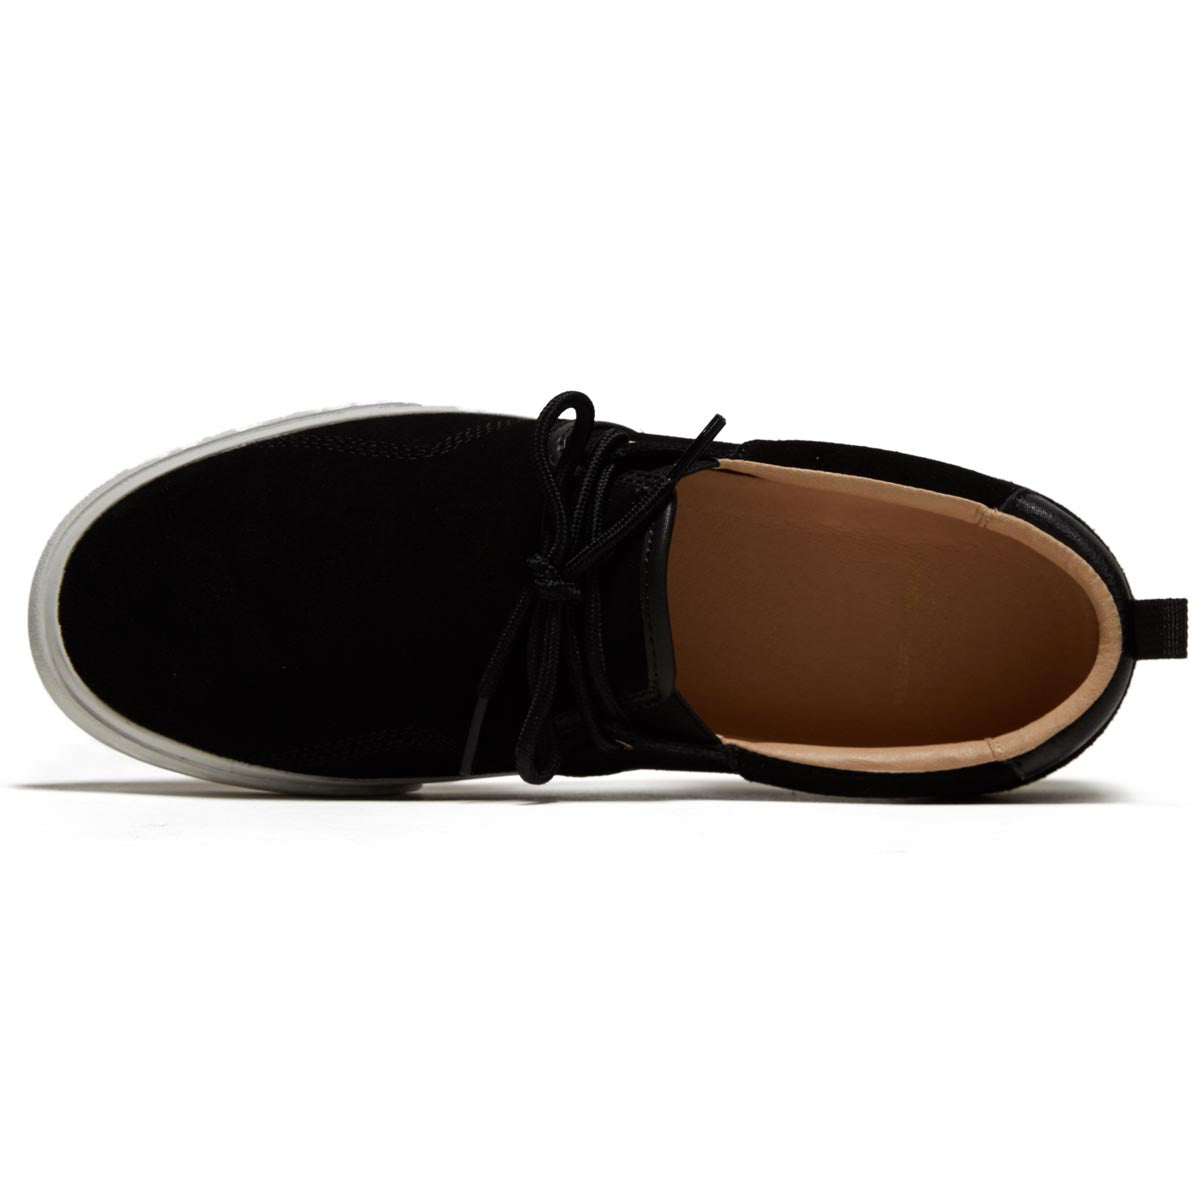 Hours Is Yours Callio S77 Shoes - Black/Off White image 3